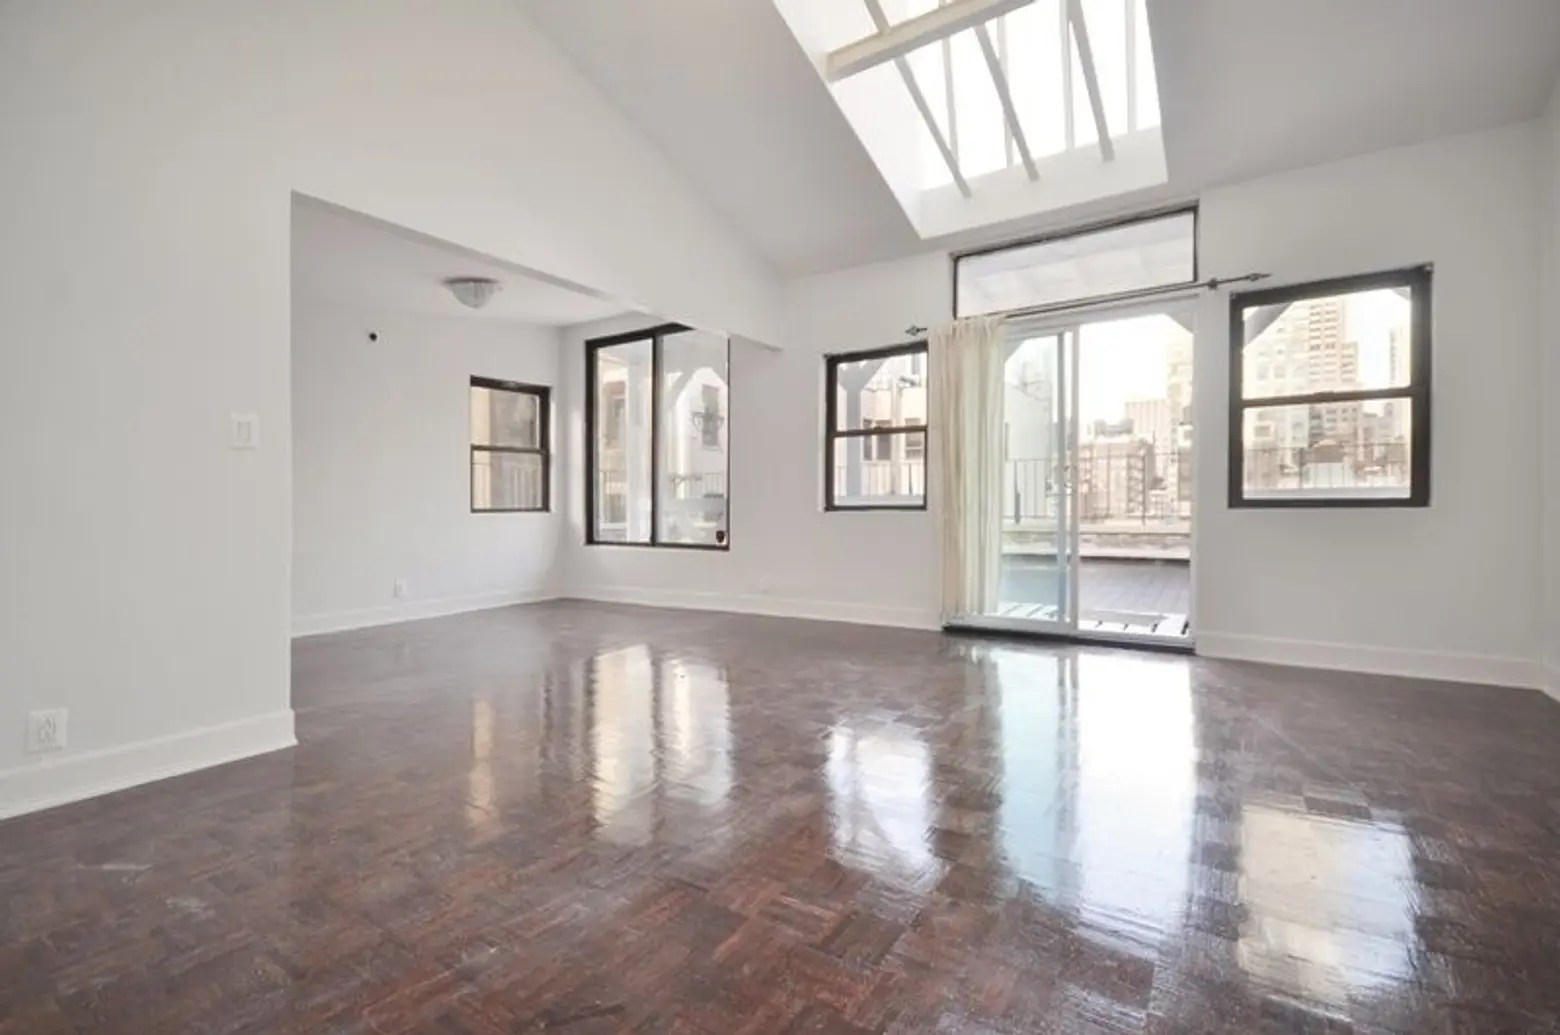 15 West 28th Street, Cool listings, rooftop cabin, Nomad, Flatiron